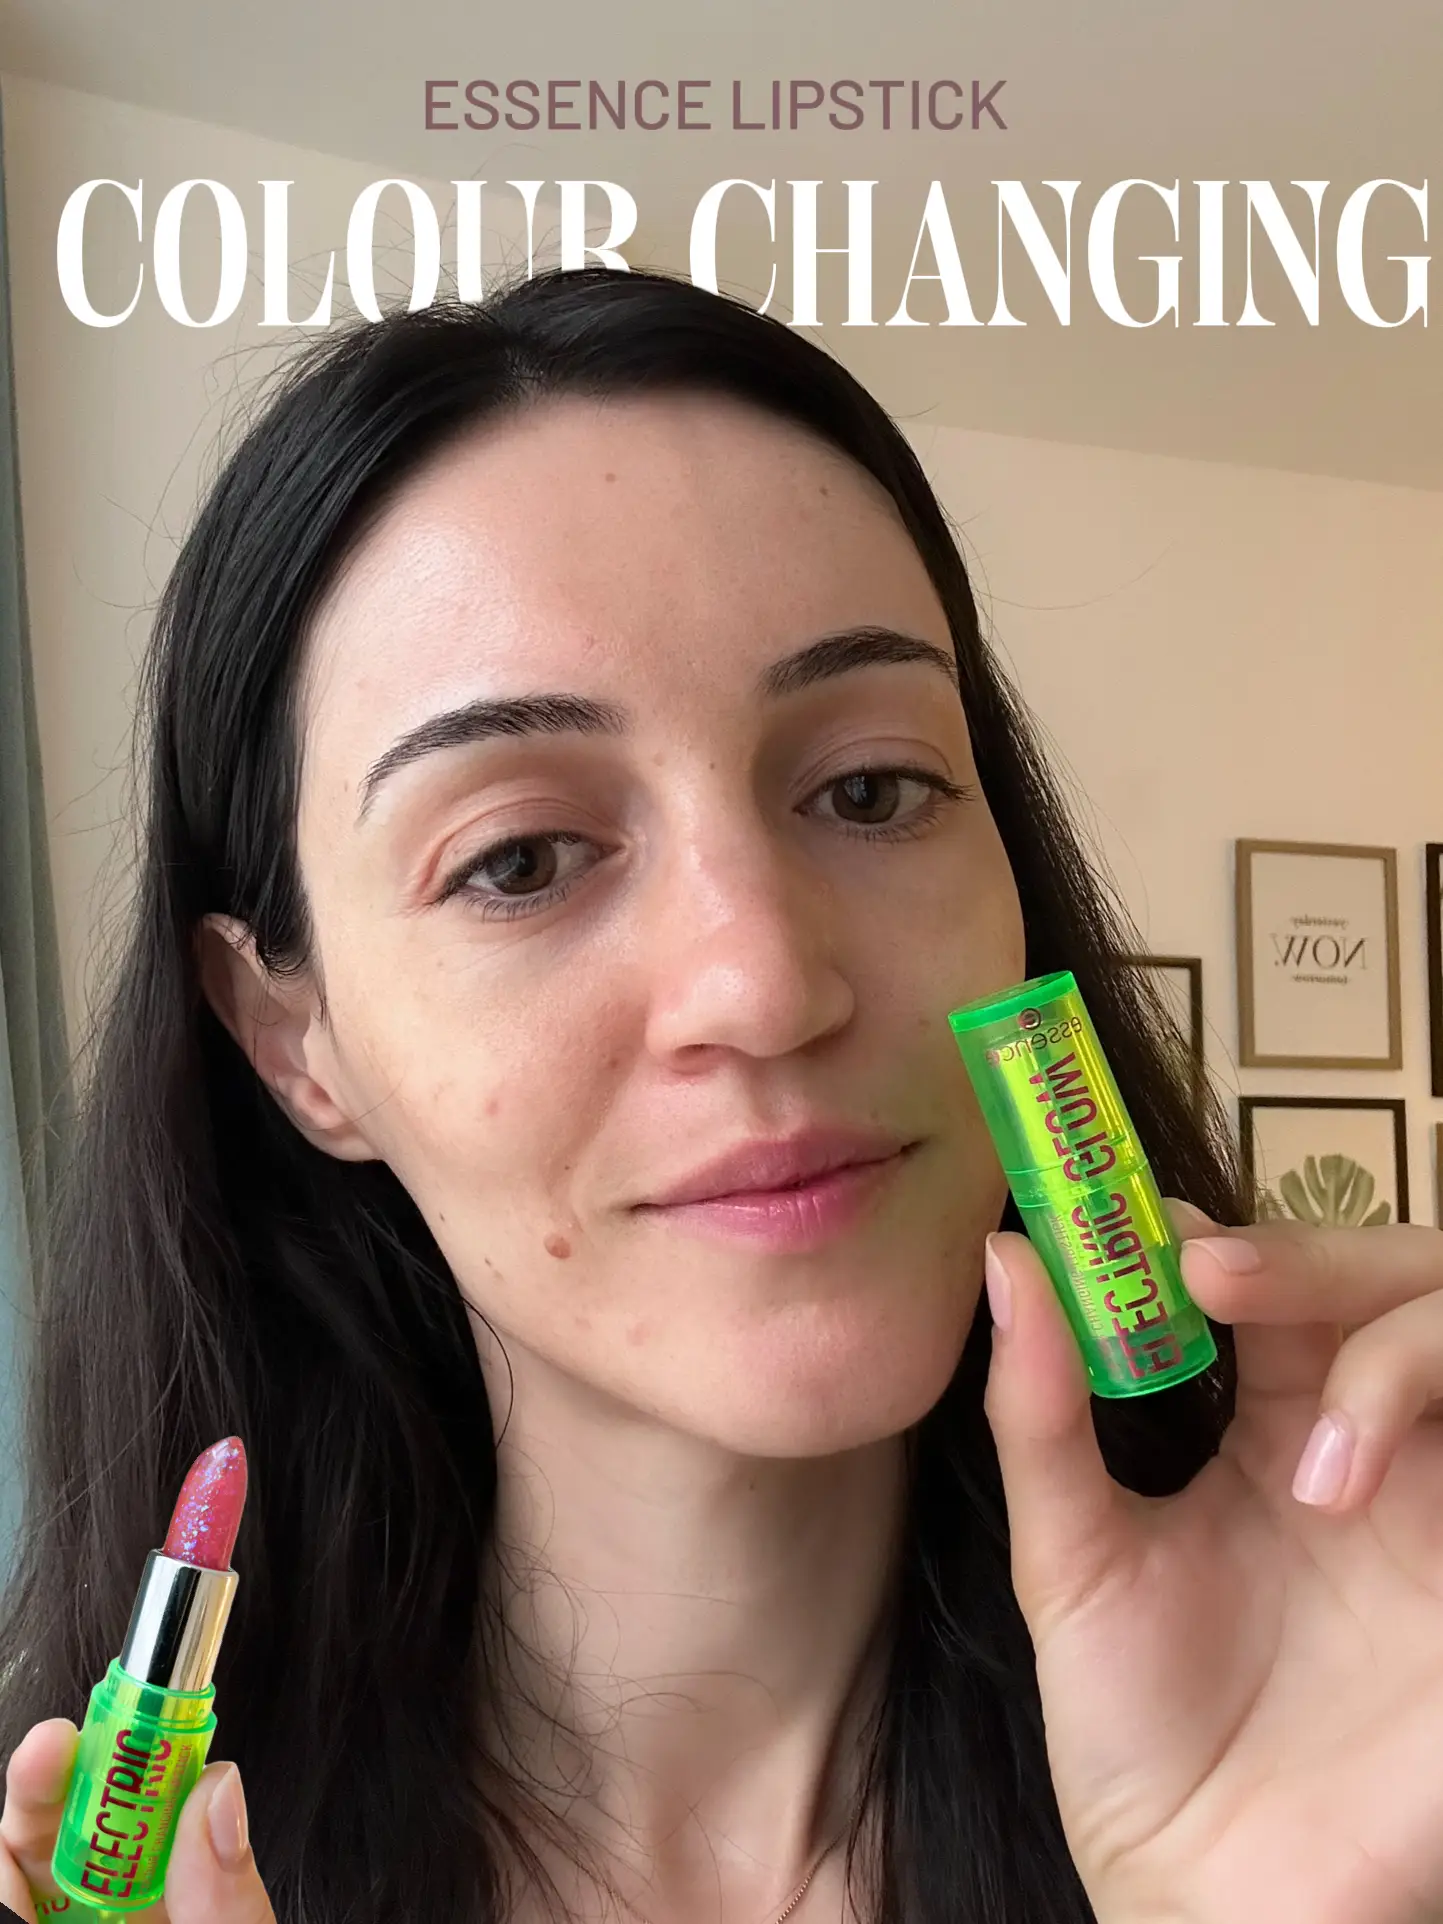 Lemon8 posted by | Gallery GLOW COLOUR Skinbyangela CHANGING ELECTRIC 💗 | LIPSTICK ESSENCE